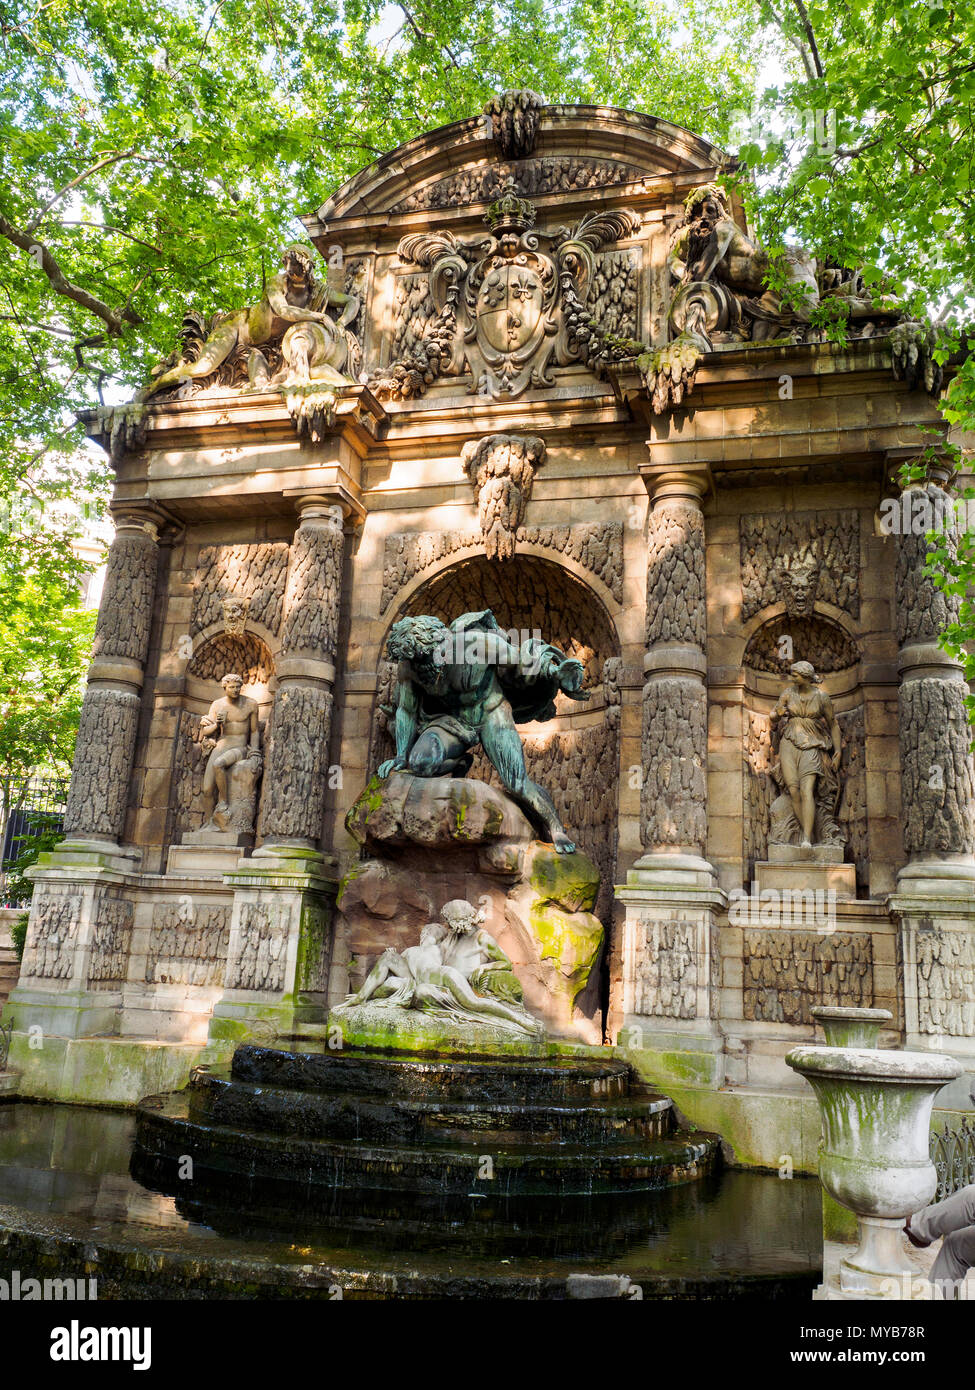 Fontaine Medicis (Medici fountain) in the Luxembourg Gardens - Paris, France Stock Photo